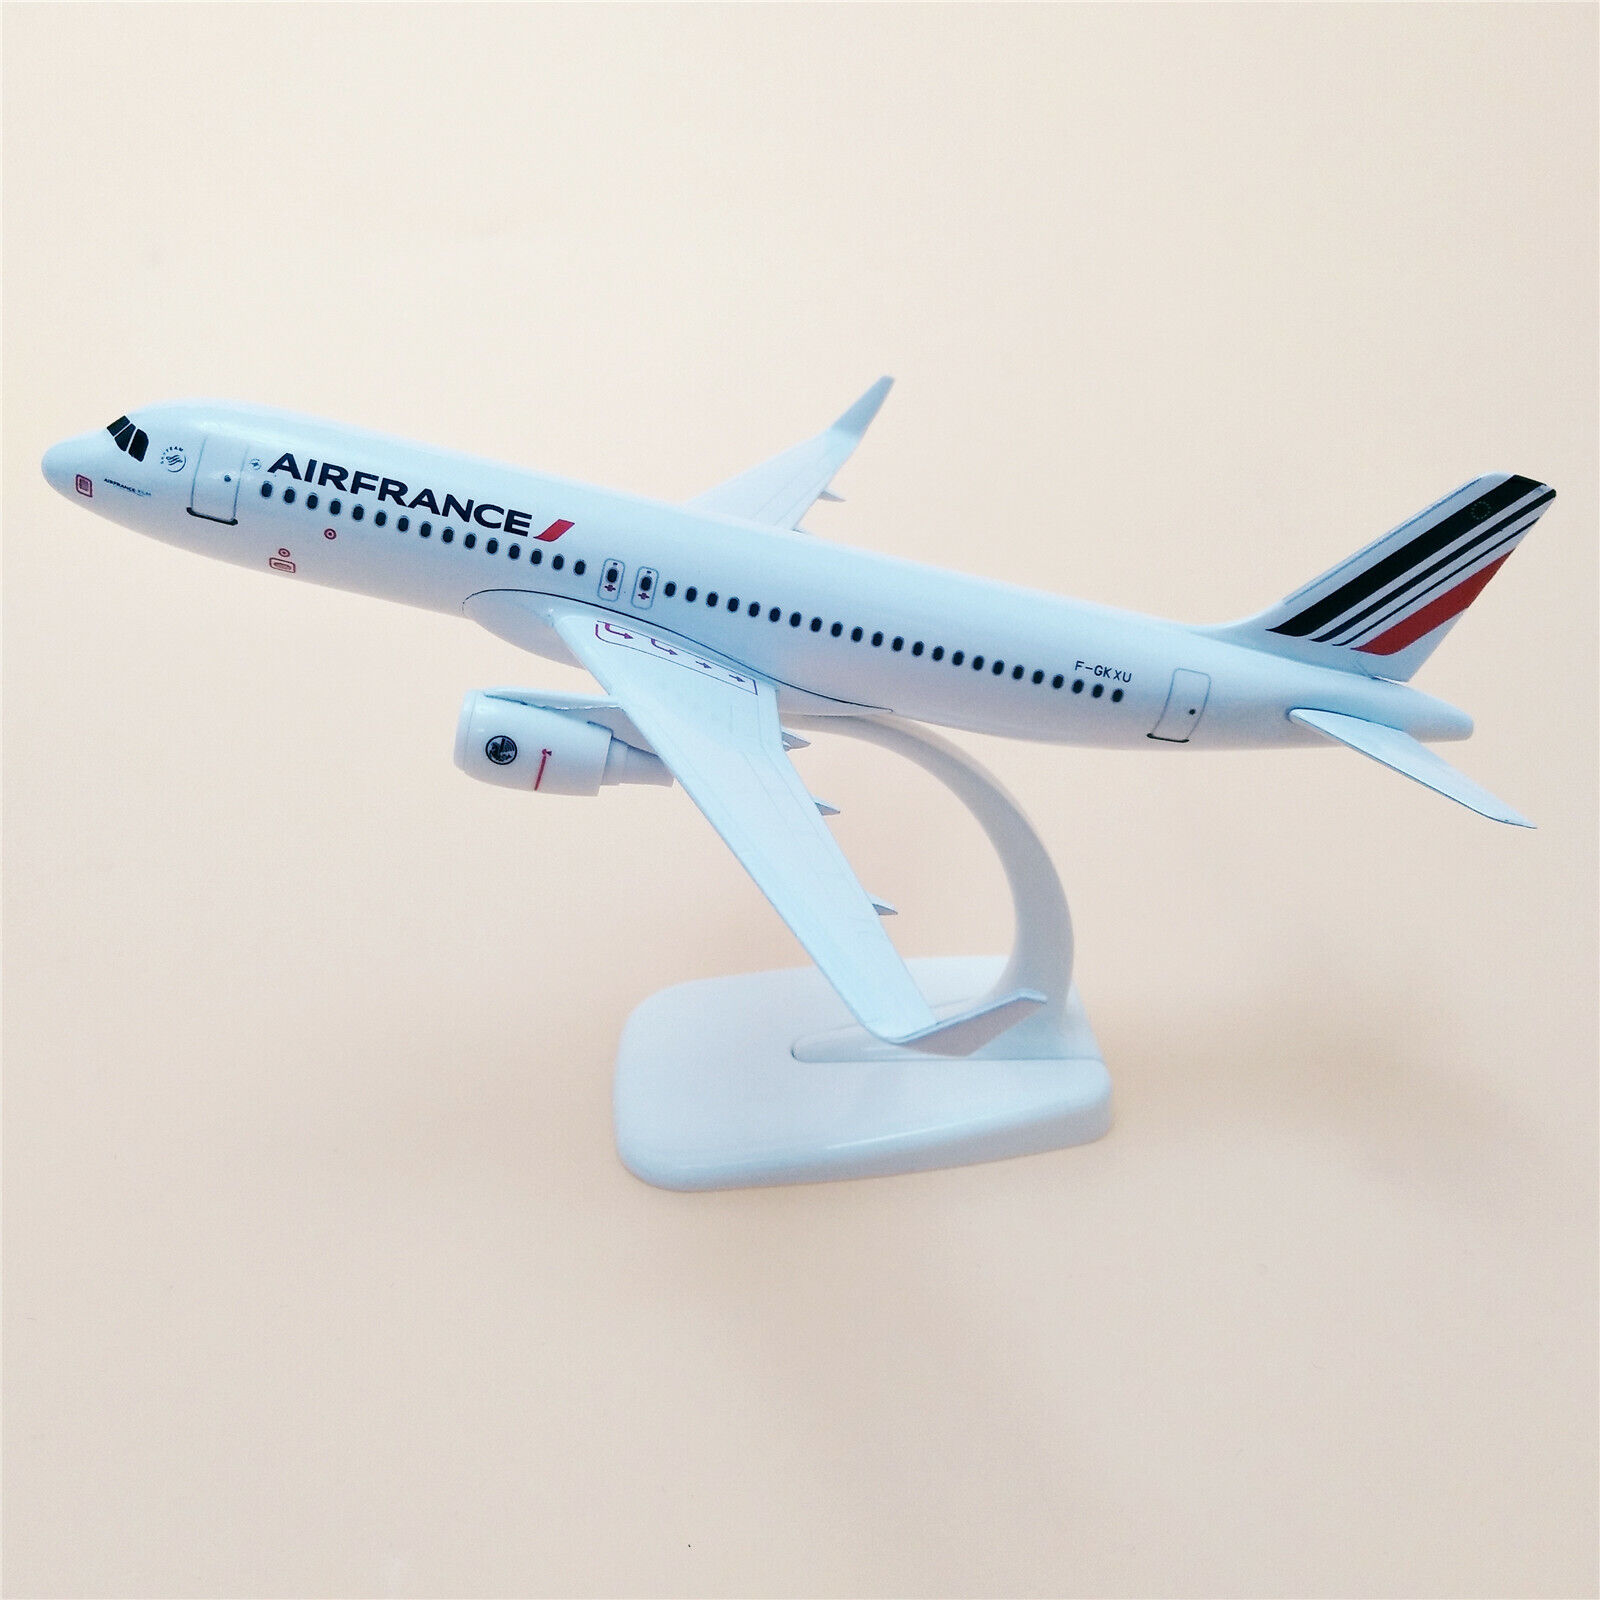 20cm Air France Airbus A320 Airlines Aircraft Airplane Model Plane Alloy Metal